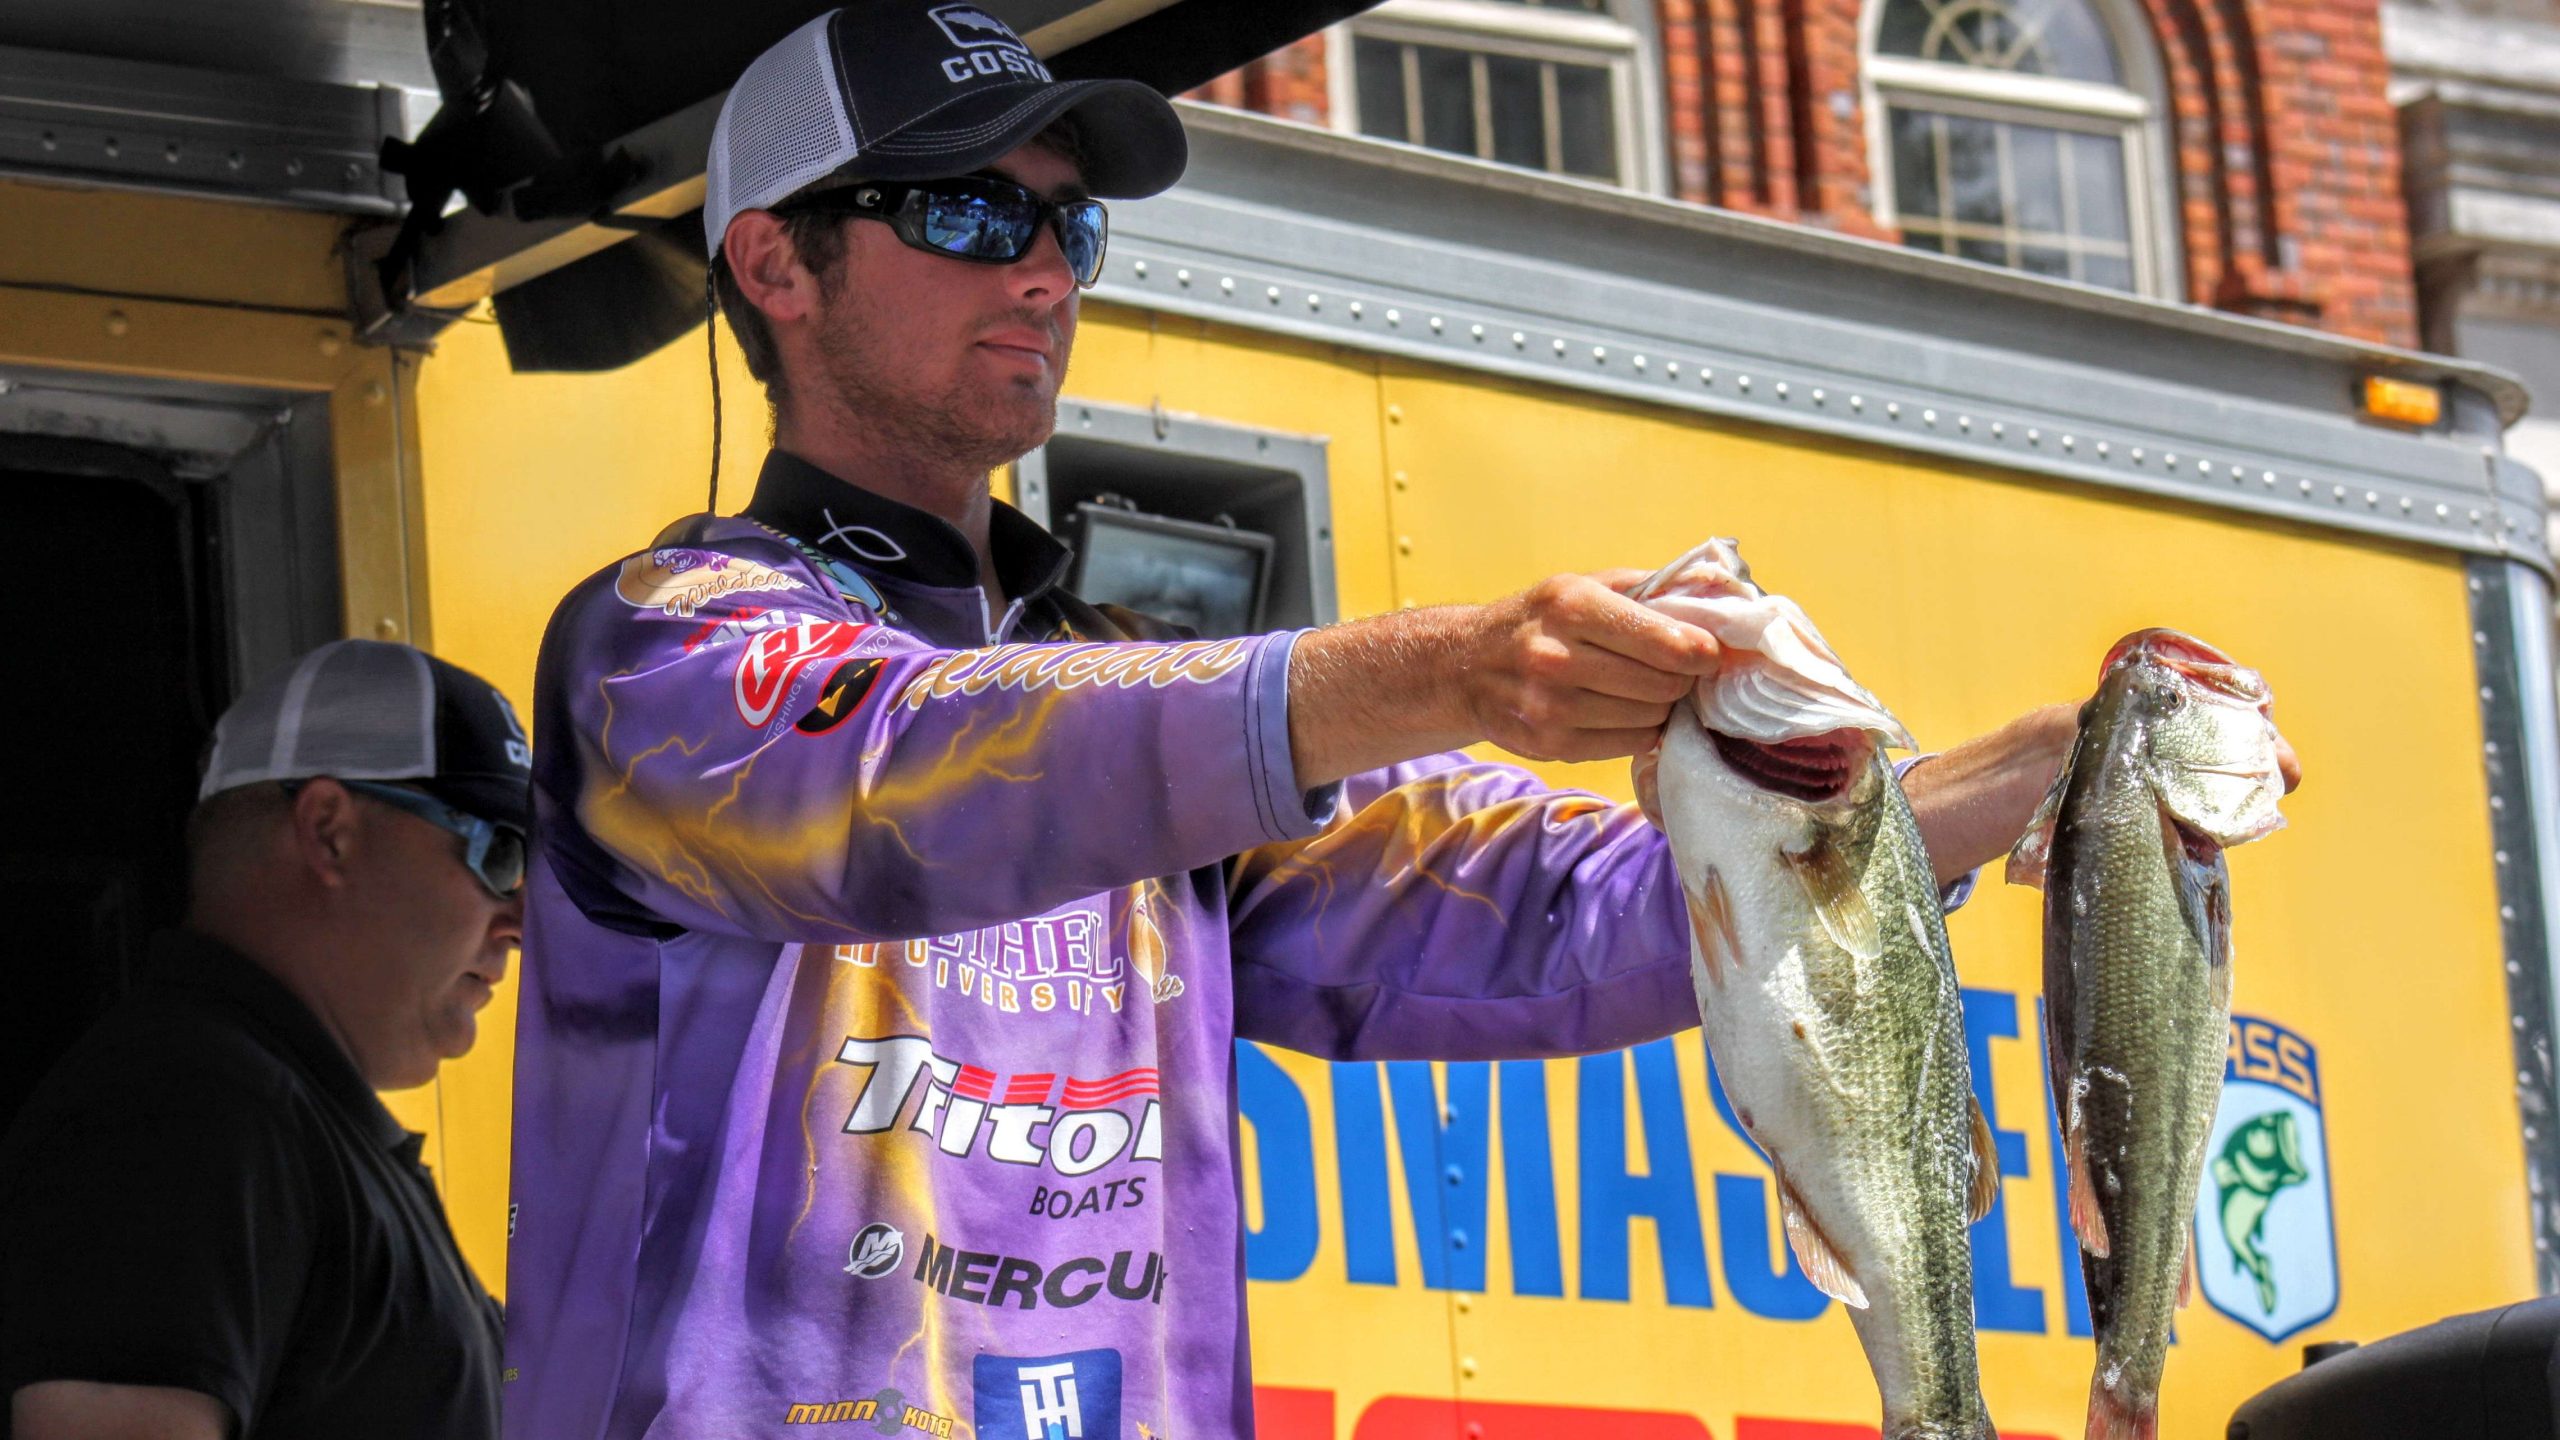 Garrett grabs hold of a couple of his Tennessee toads and displays them for the crowd.